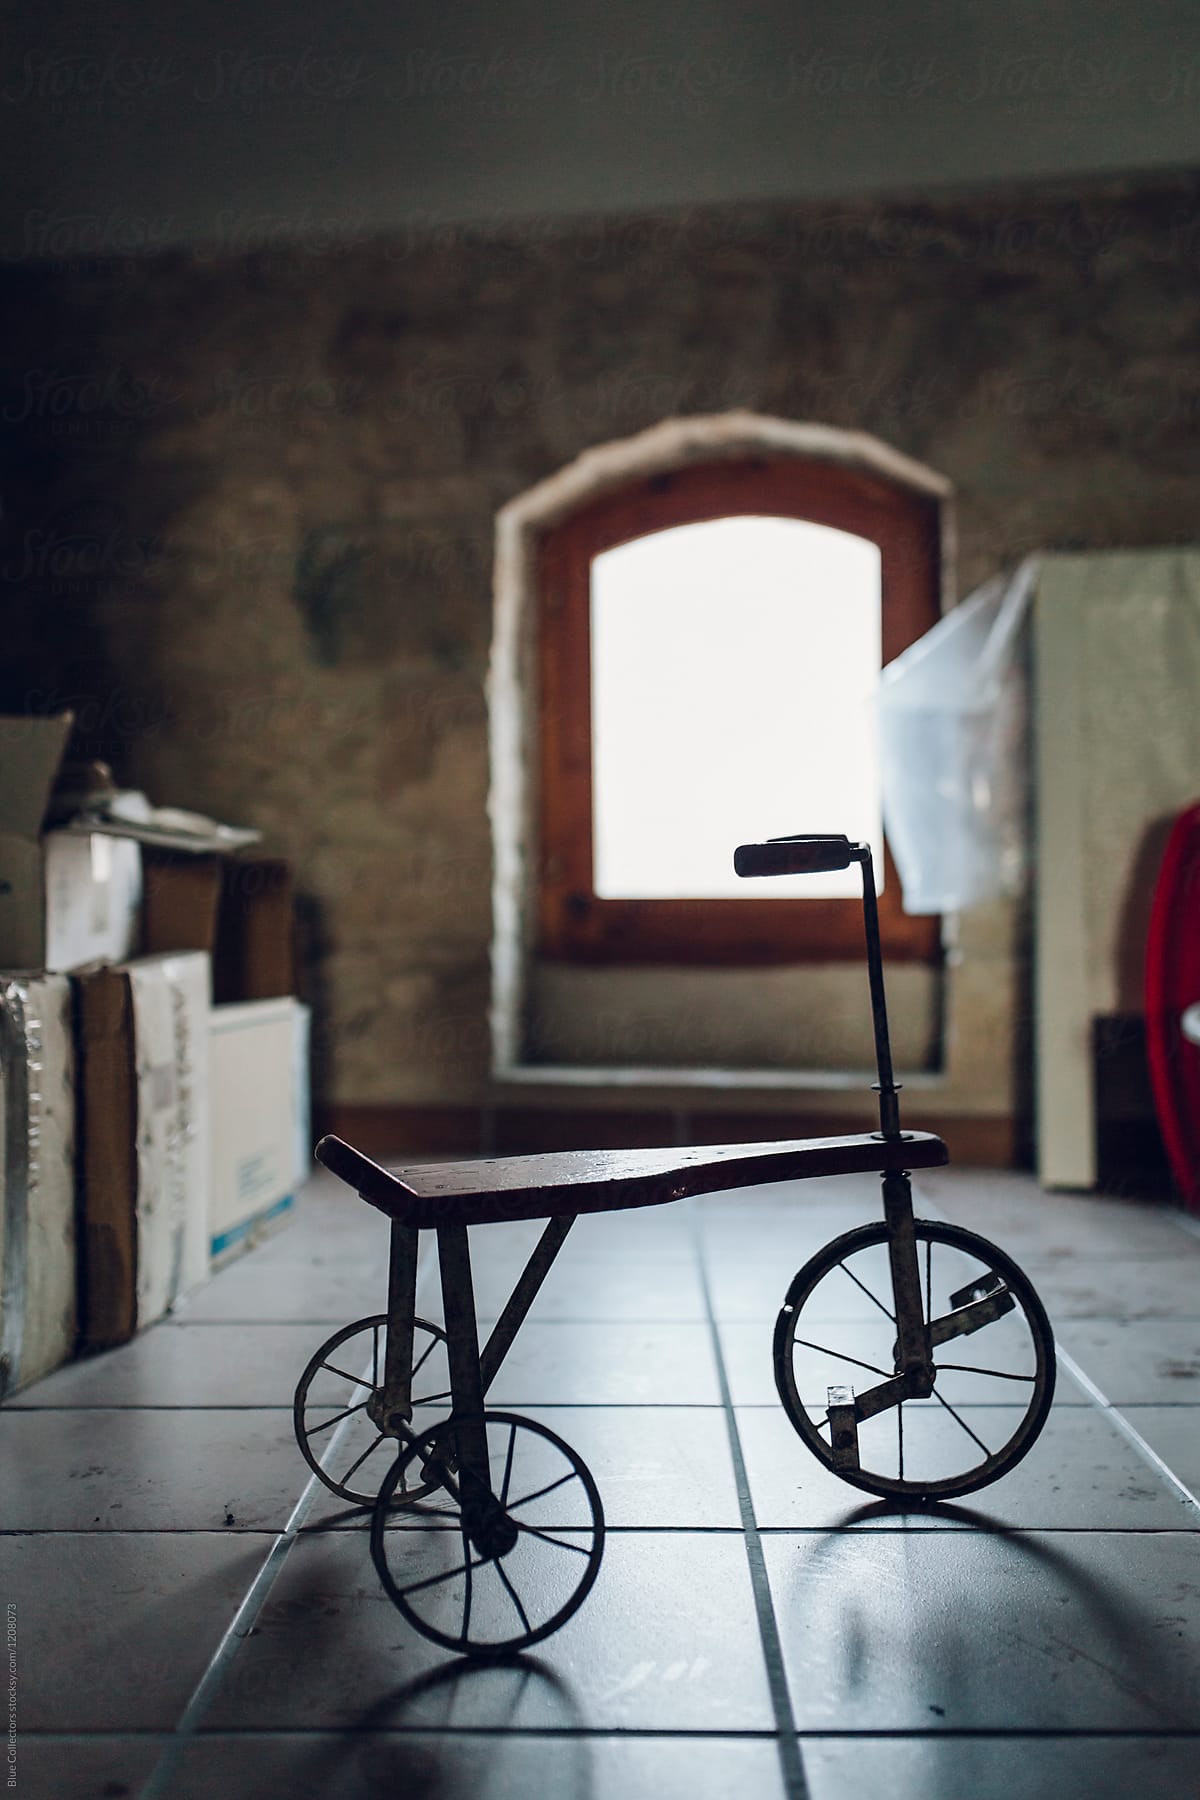 Old tricycle on a warehouse